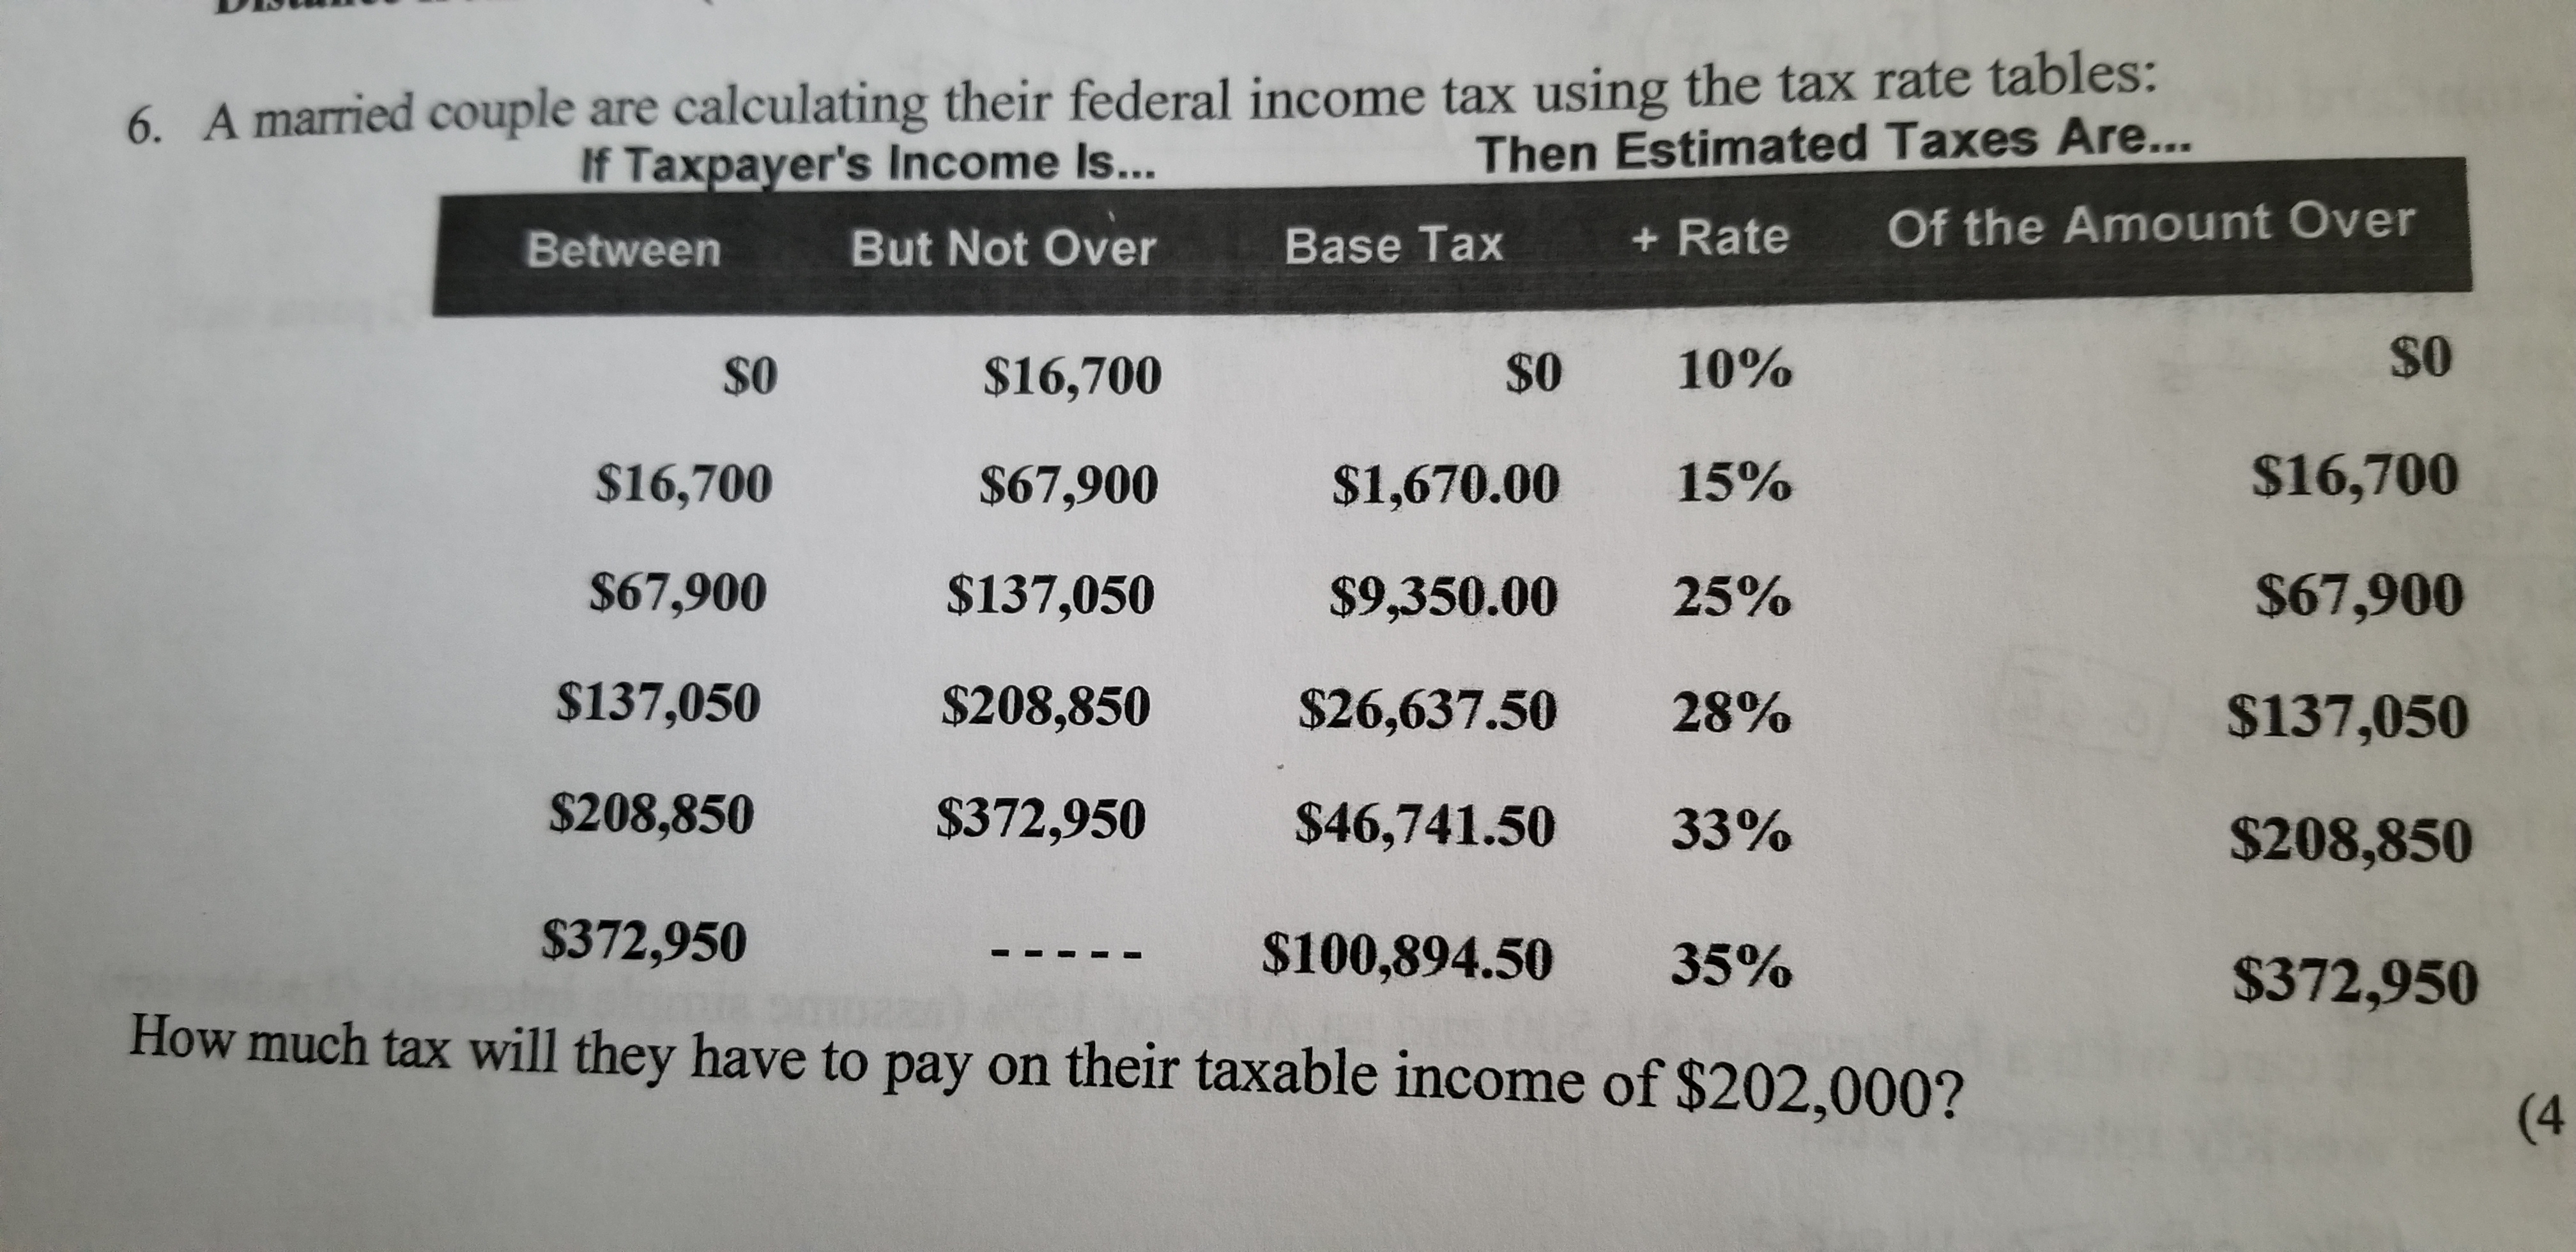 6. A married couple are calculating their federal income tax using the tax rate tables:
Then Estimated Taxes Are
If Taxpayer's Income Is
Between
So
$16,700
$67,900
$137,050
$208,850
$372,950
But Not Over
$16,700
$67,900
$137,050
$208,850
$372,950
Base TaxRate
$0 10%
$1,670.00 15%
$9,350.00 25%
$26,637.50 28%
$46,741.50 33%
$100,894.50 35%
S0
$16,700
$67,900
$137,050
$208,850
$372,950
How much tax will they have to pay on their taxable income of $202,000?
(4
